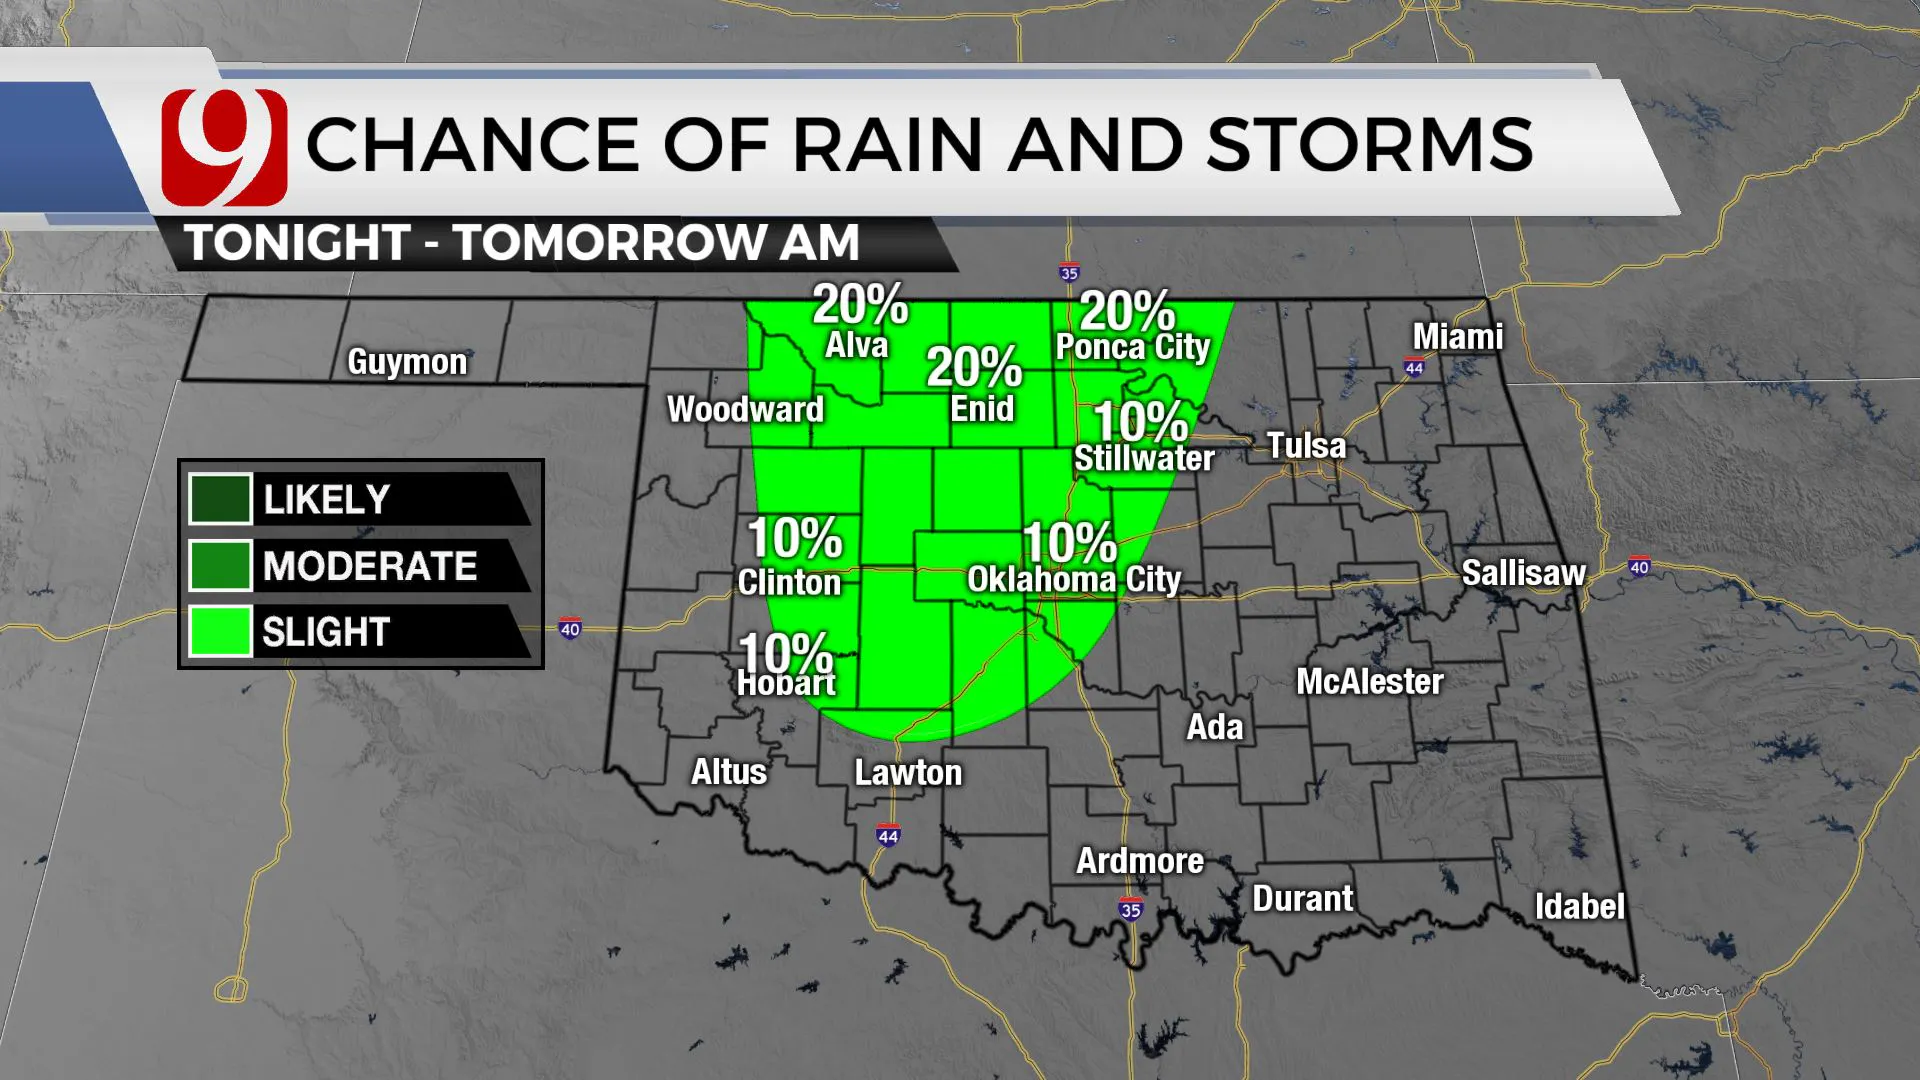 Chances of rain and storms for Thursday and Friday.